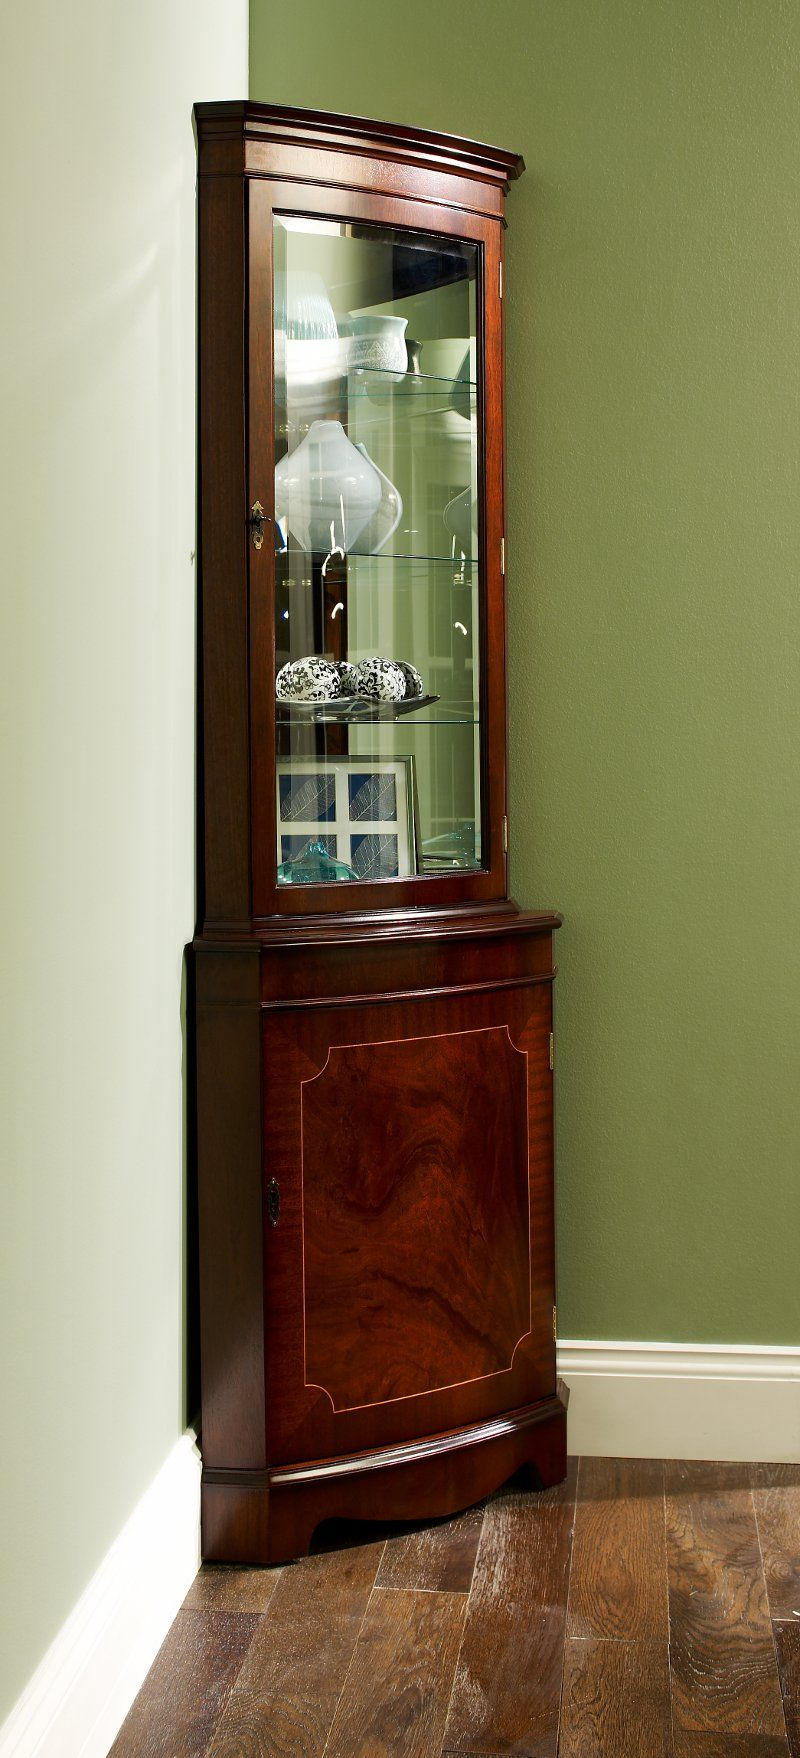 Reproduction Bow Corner Display Cabinet Products I Love In regarding measurements 800 X 1758